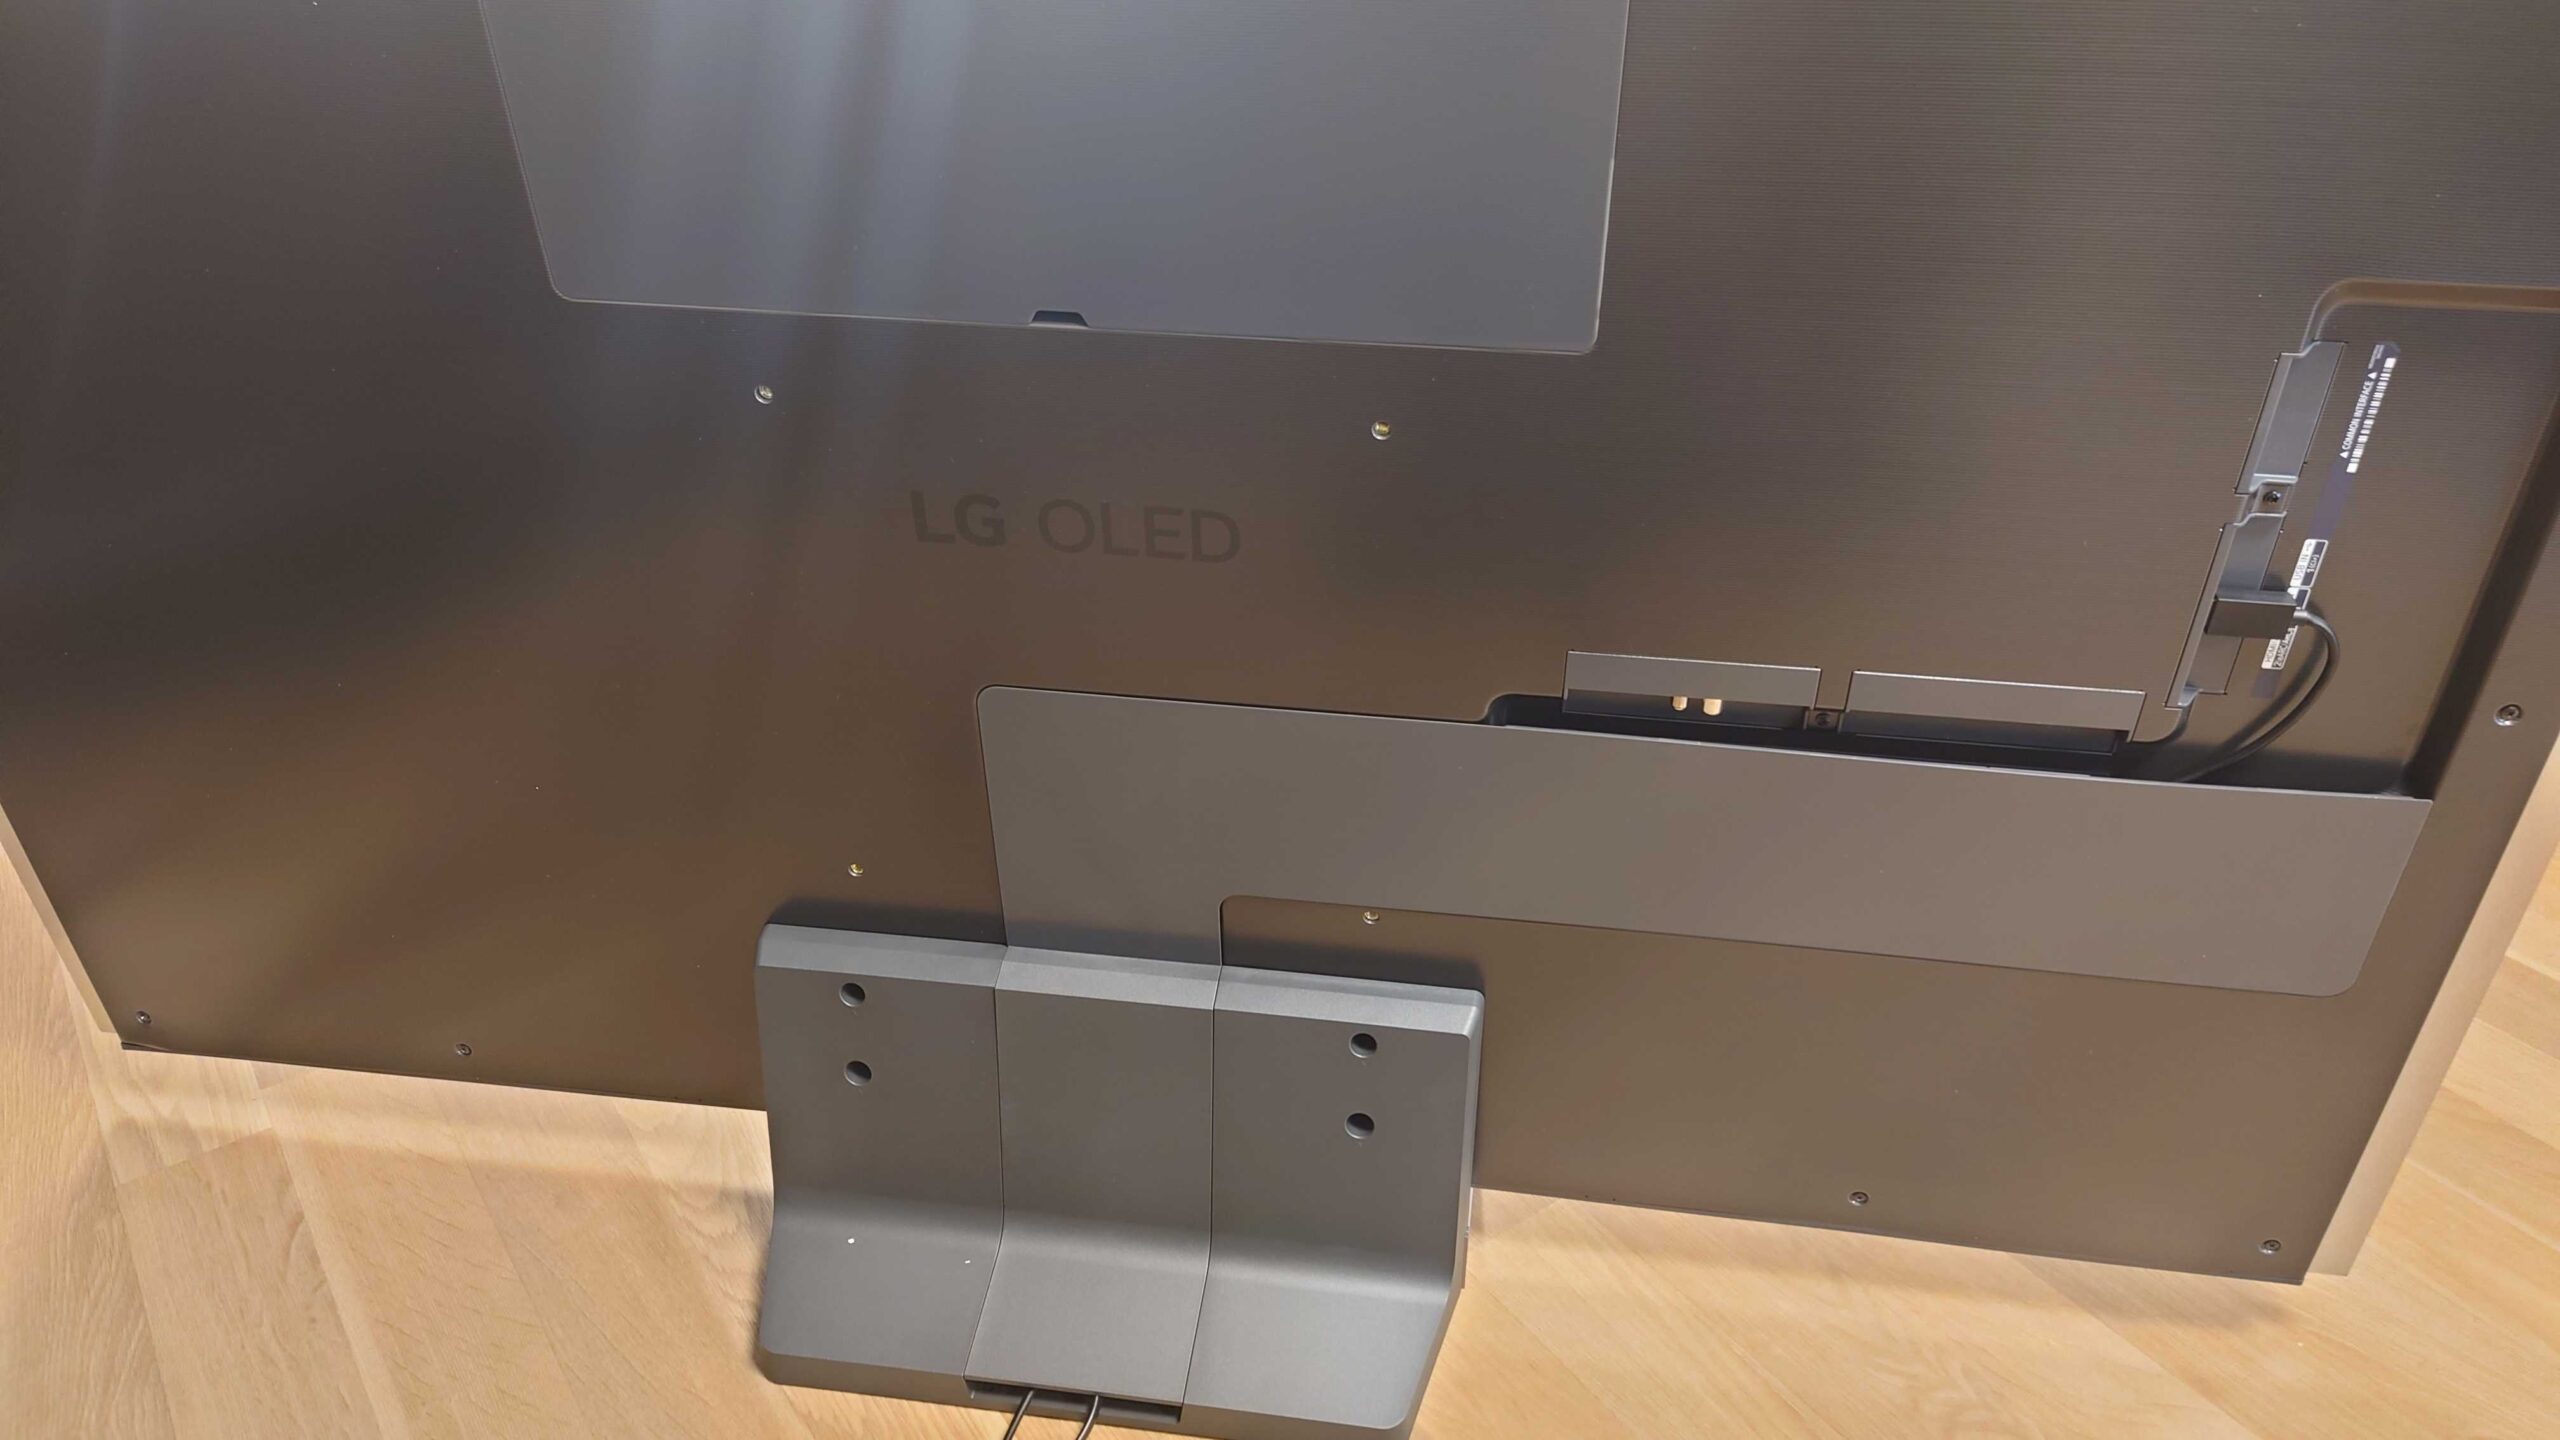 LG OLED G2 connections hidden